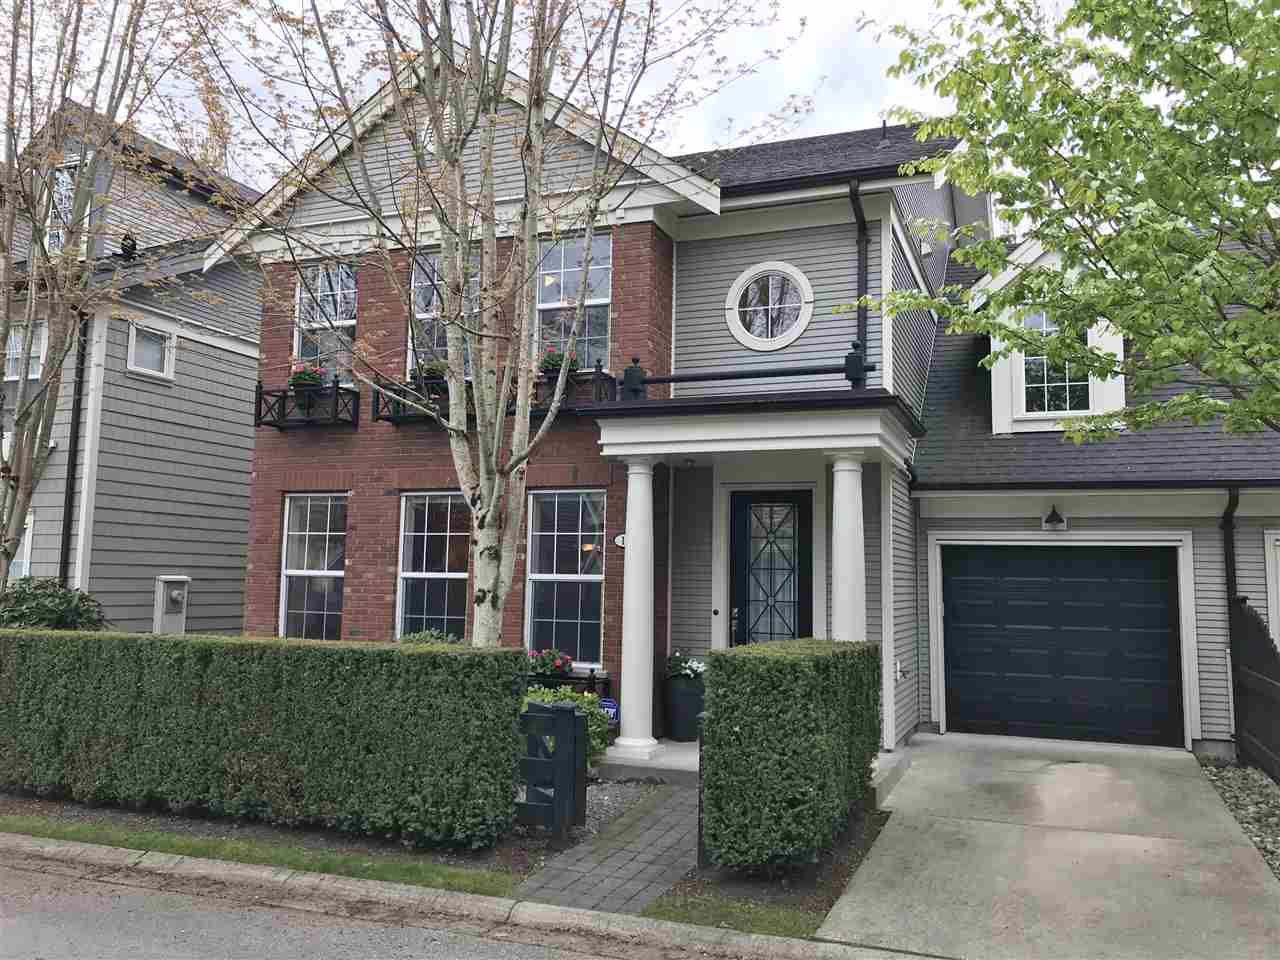 Main Photo: 18 19490 FRASER WAY in Pitt Meadows: South Meadows Townhouse for sale : MLS®# R2444045